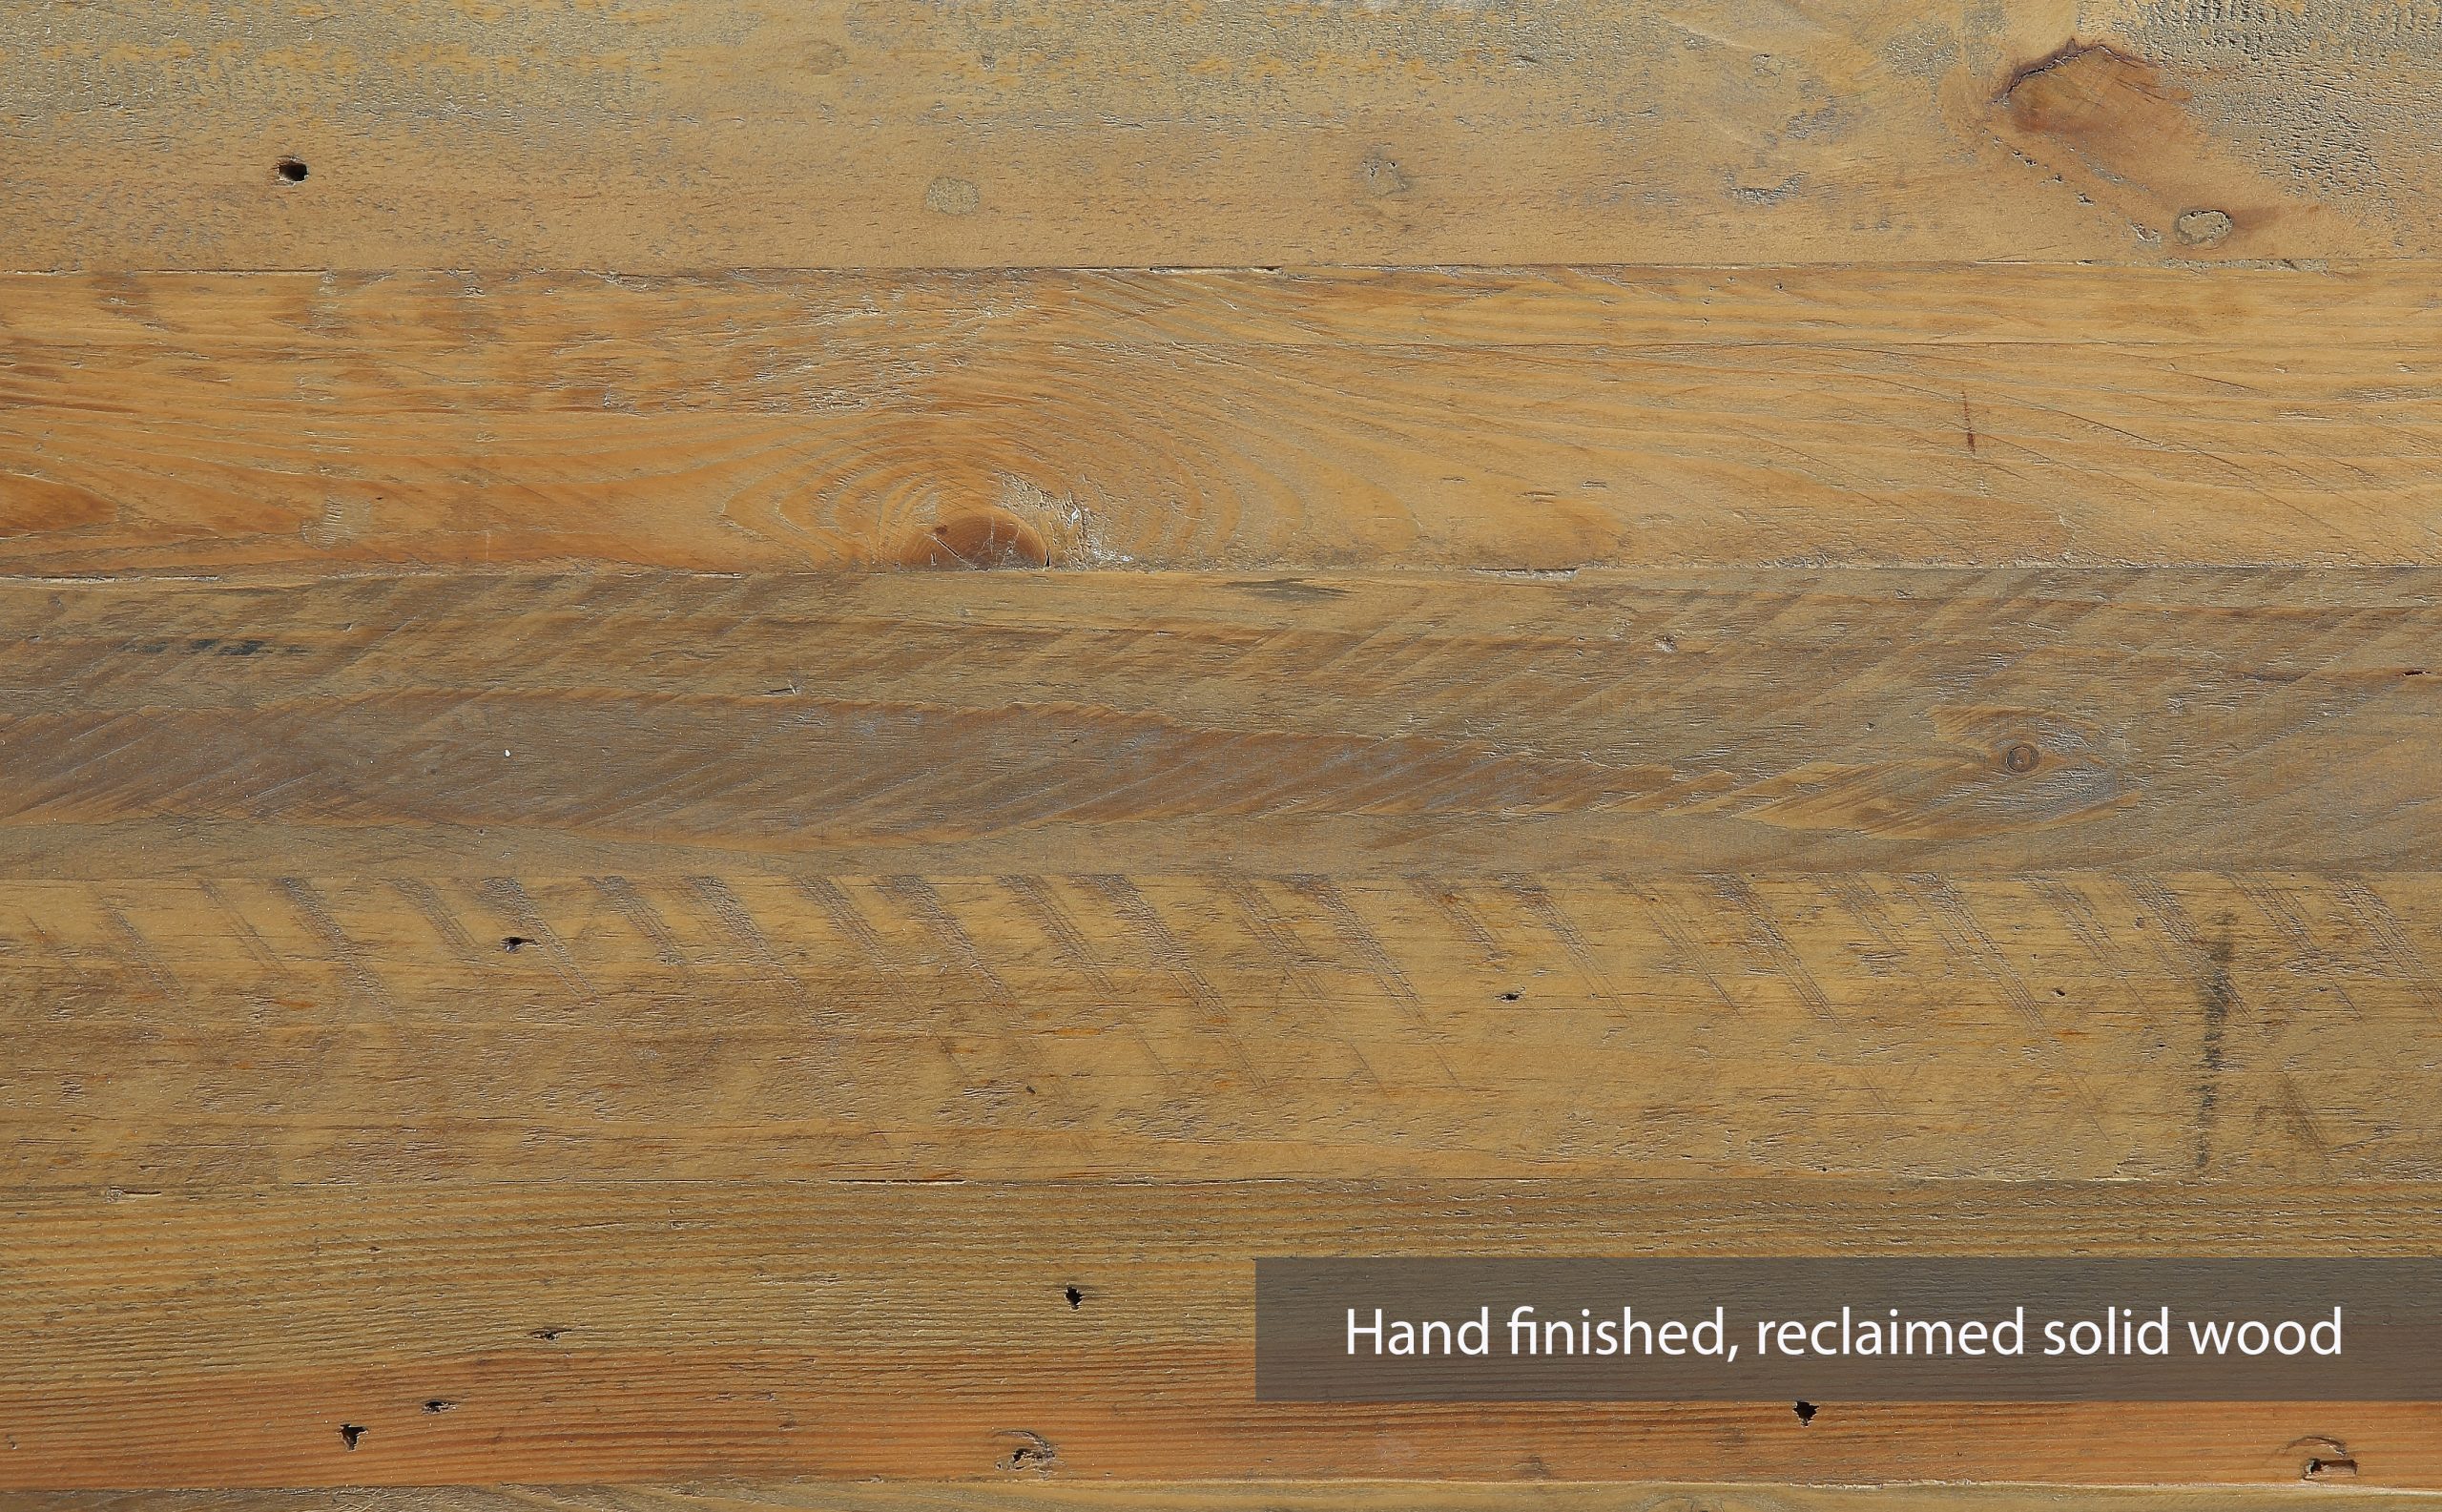 hand-finished, reclaimed solid wood